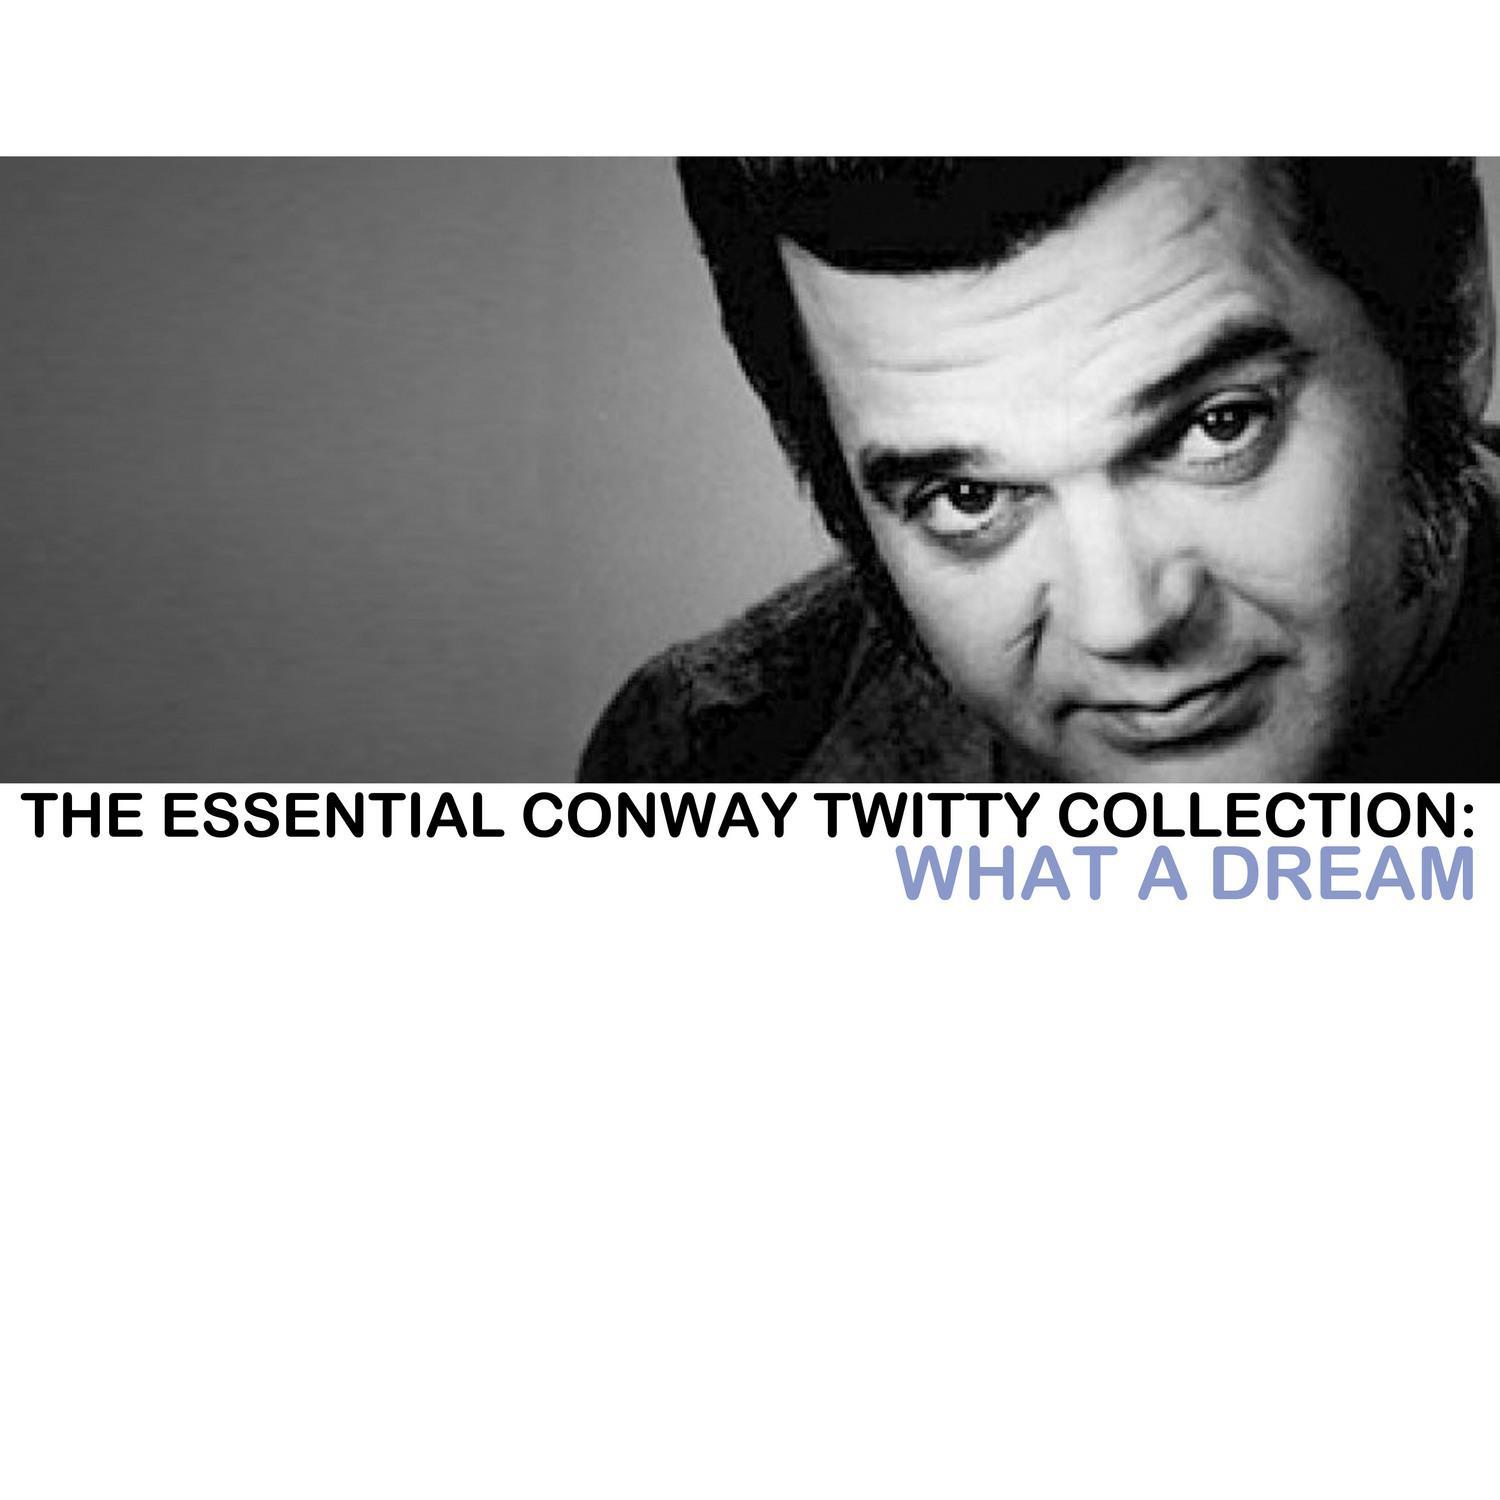 The Essential Conway Twitty Collection: What a Dream